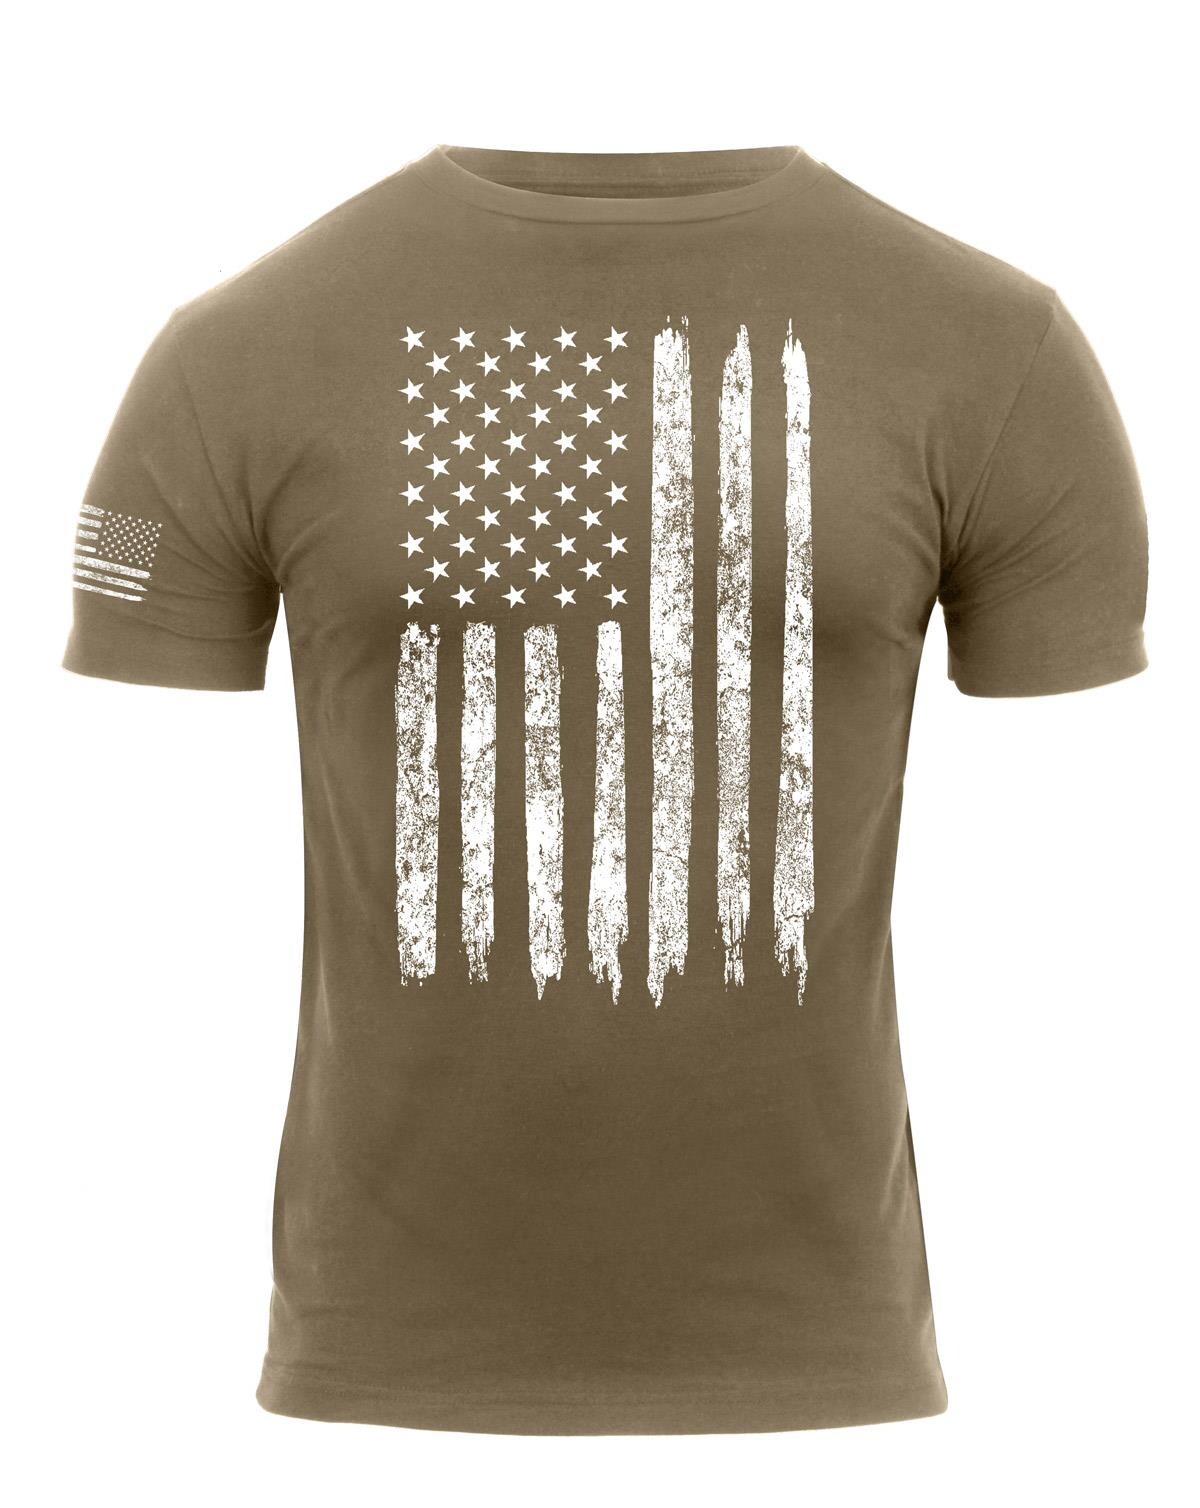 Rothco T-shirt - 'Distressed US Flag', Athletic Fit (Coyote Brun, 3XL)